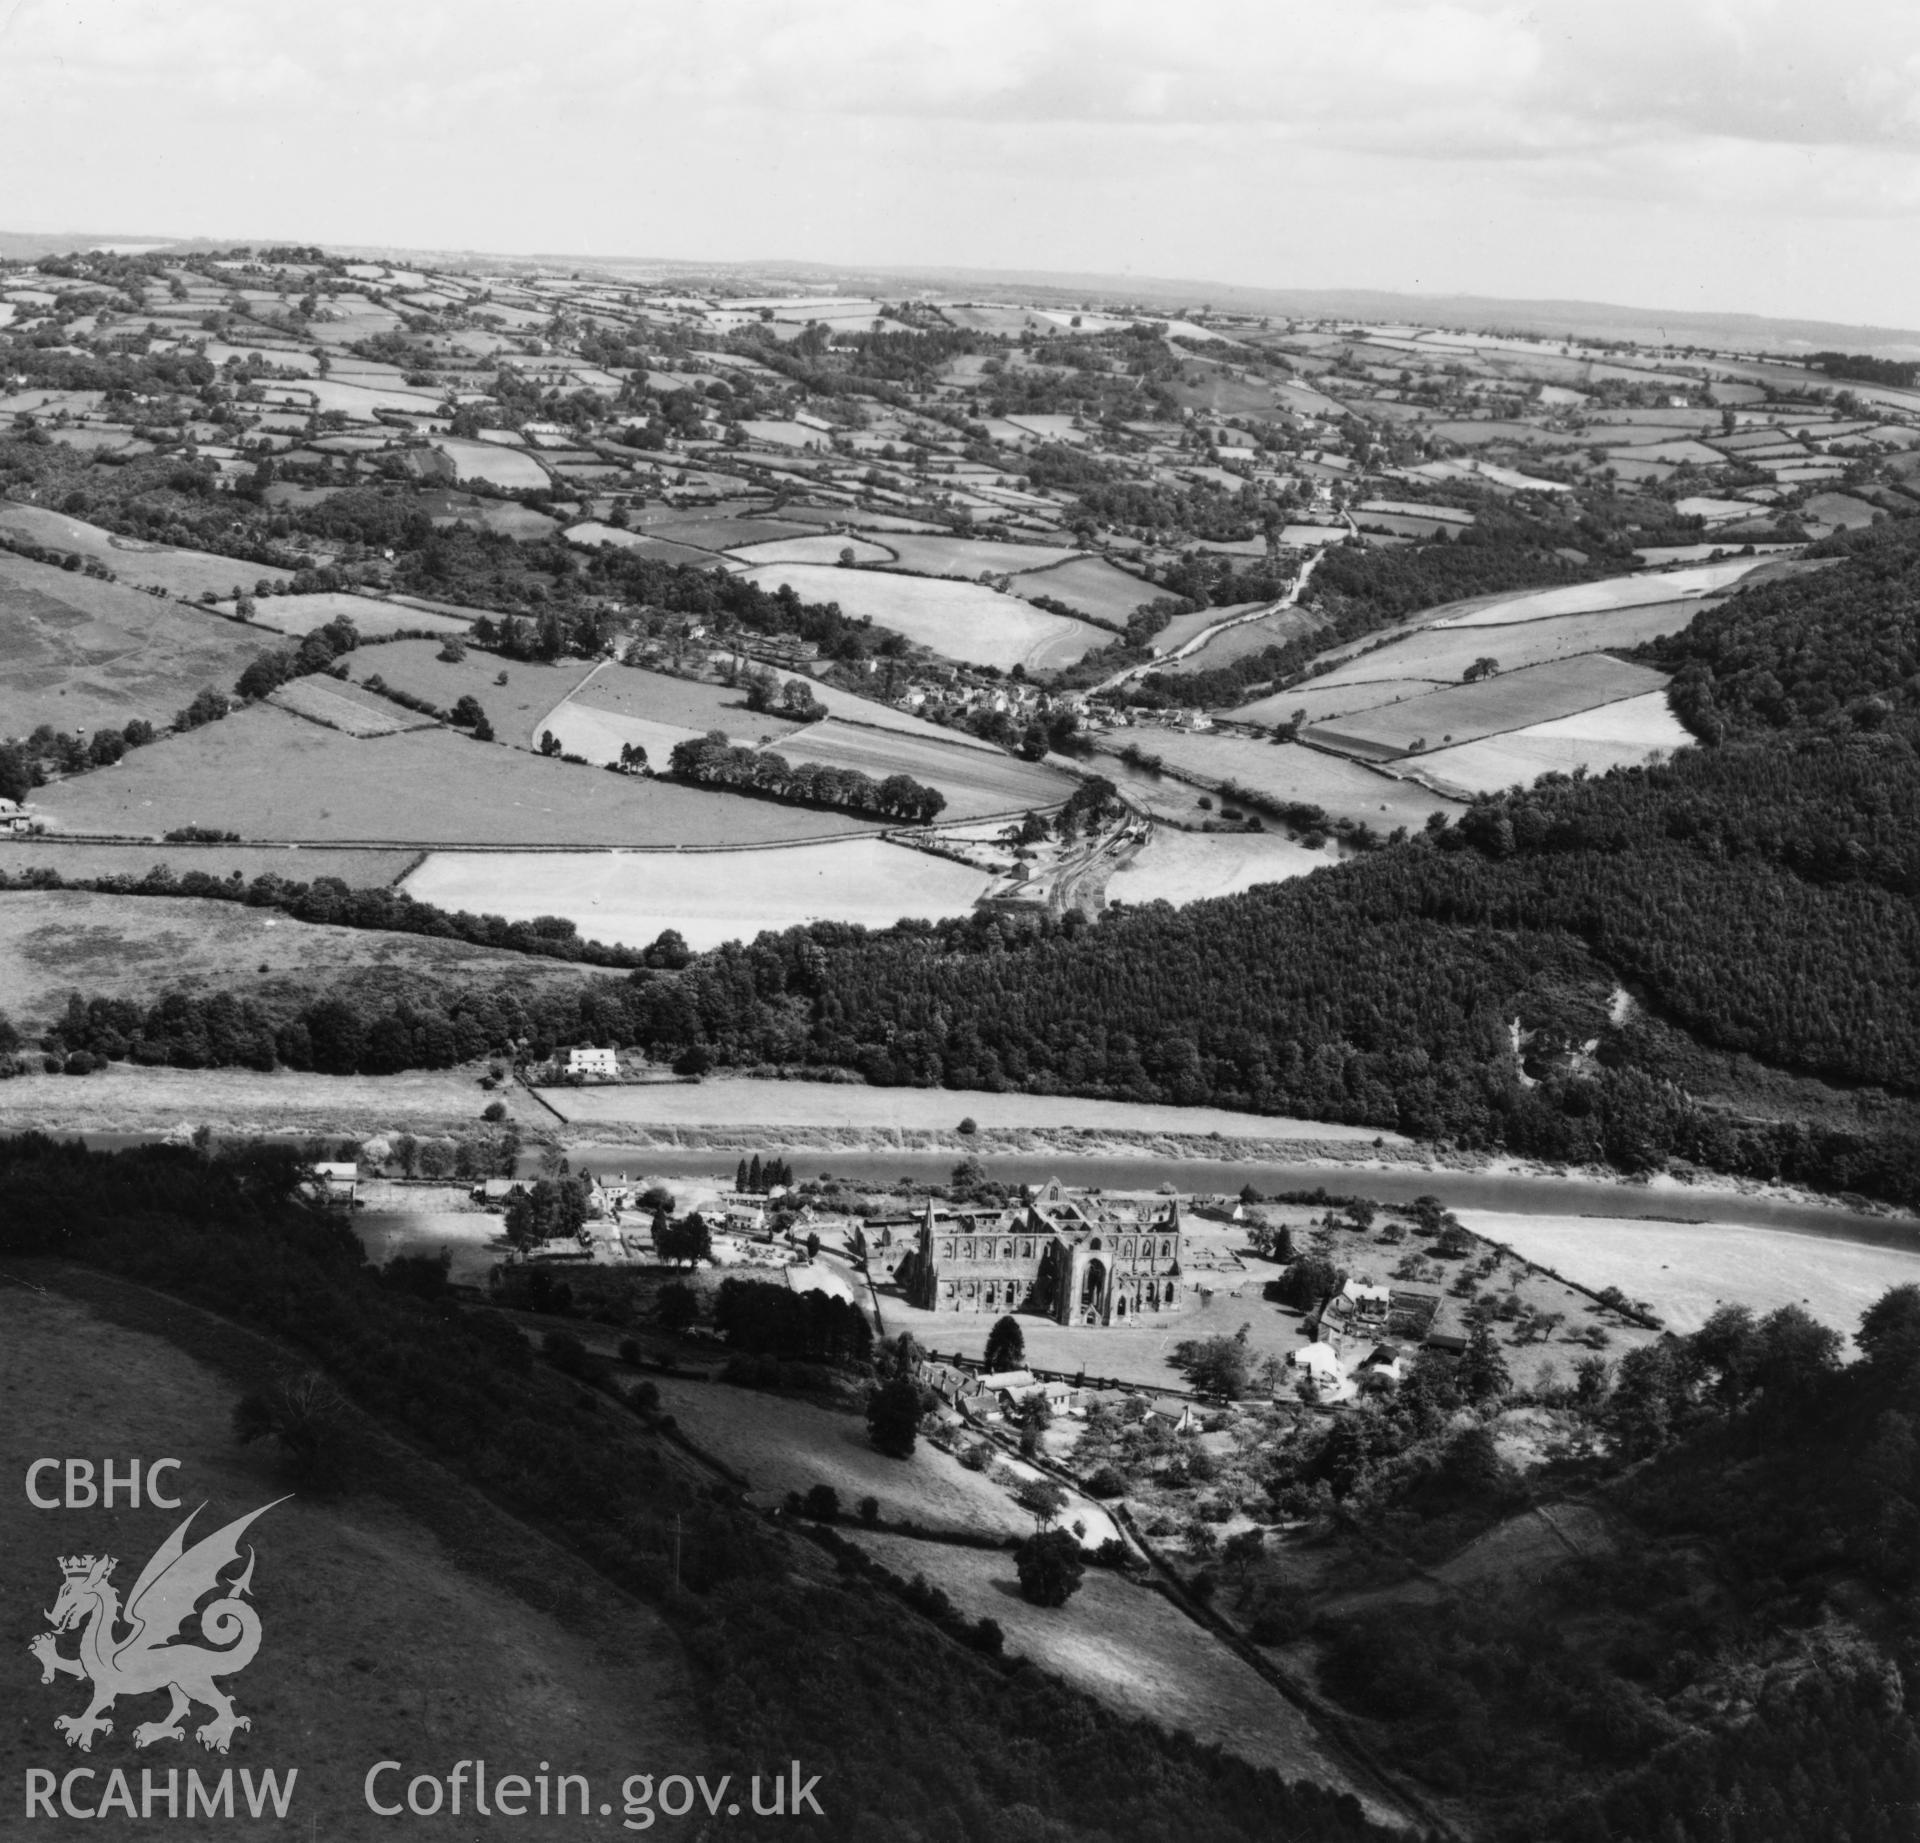 View of Tintern Abbey and the Wye valley. Oblique aerial photograph, 5?" cut roll film.